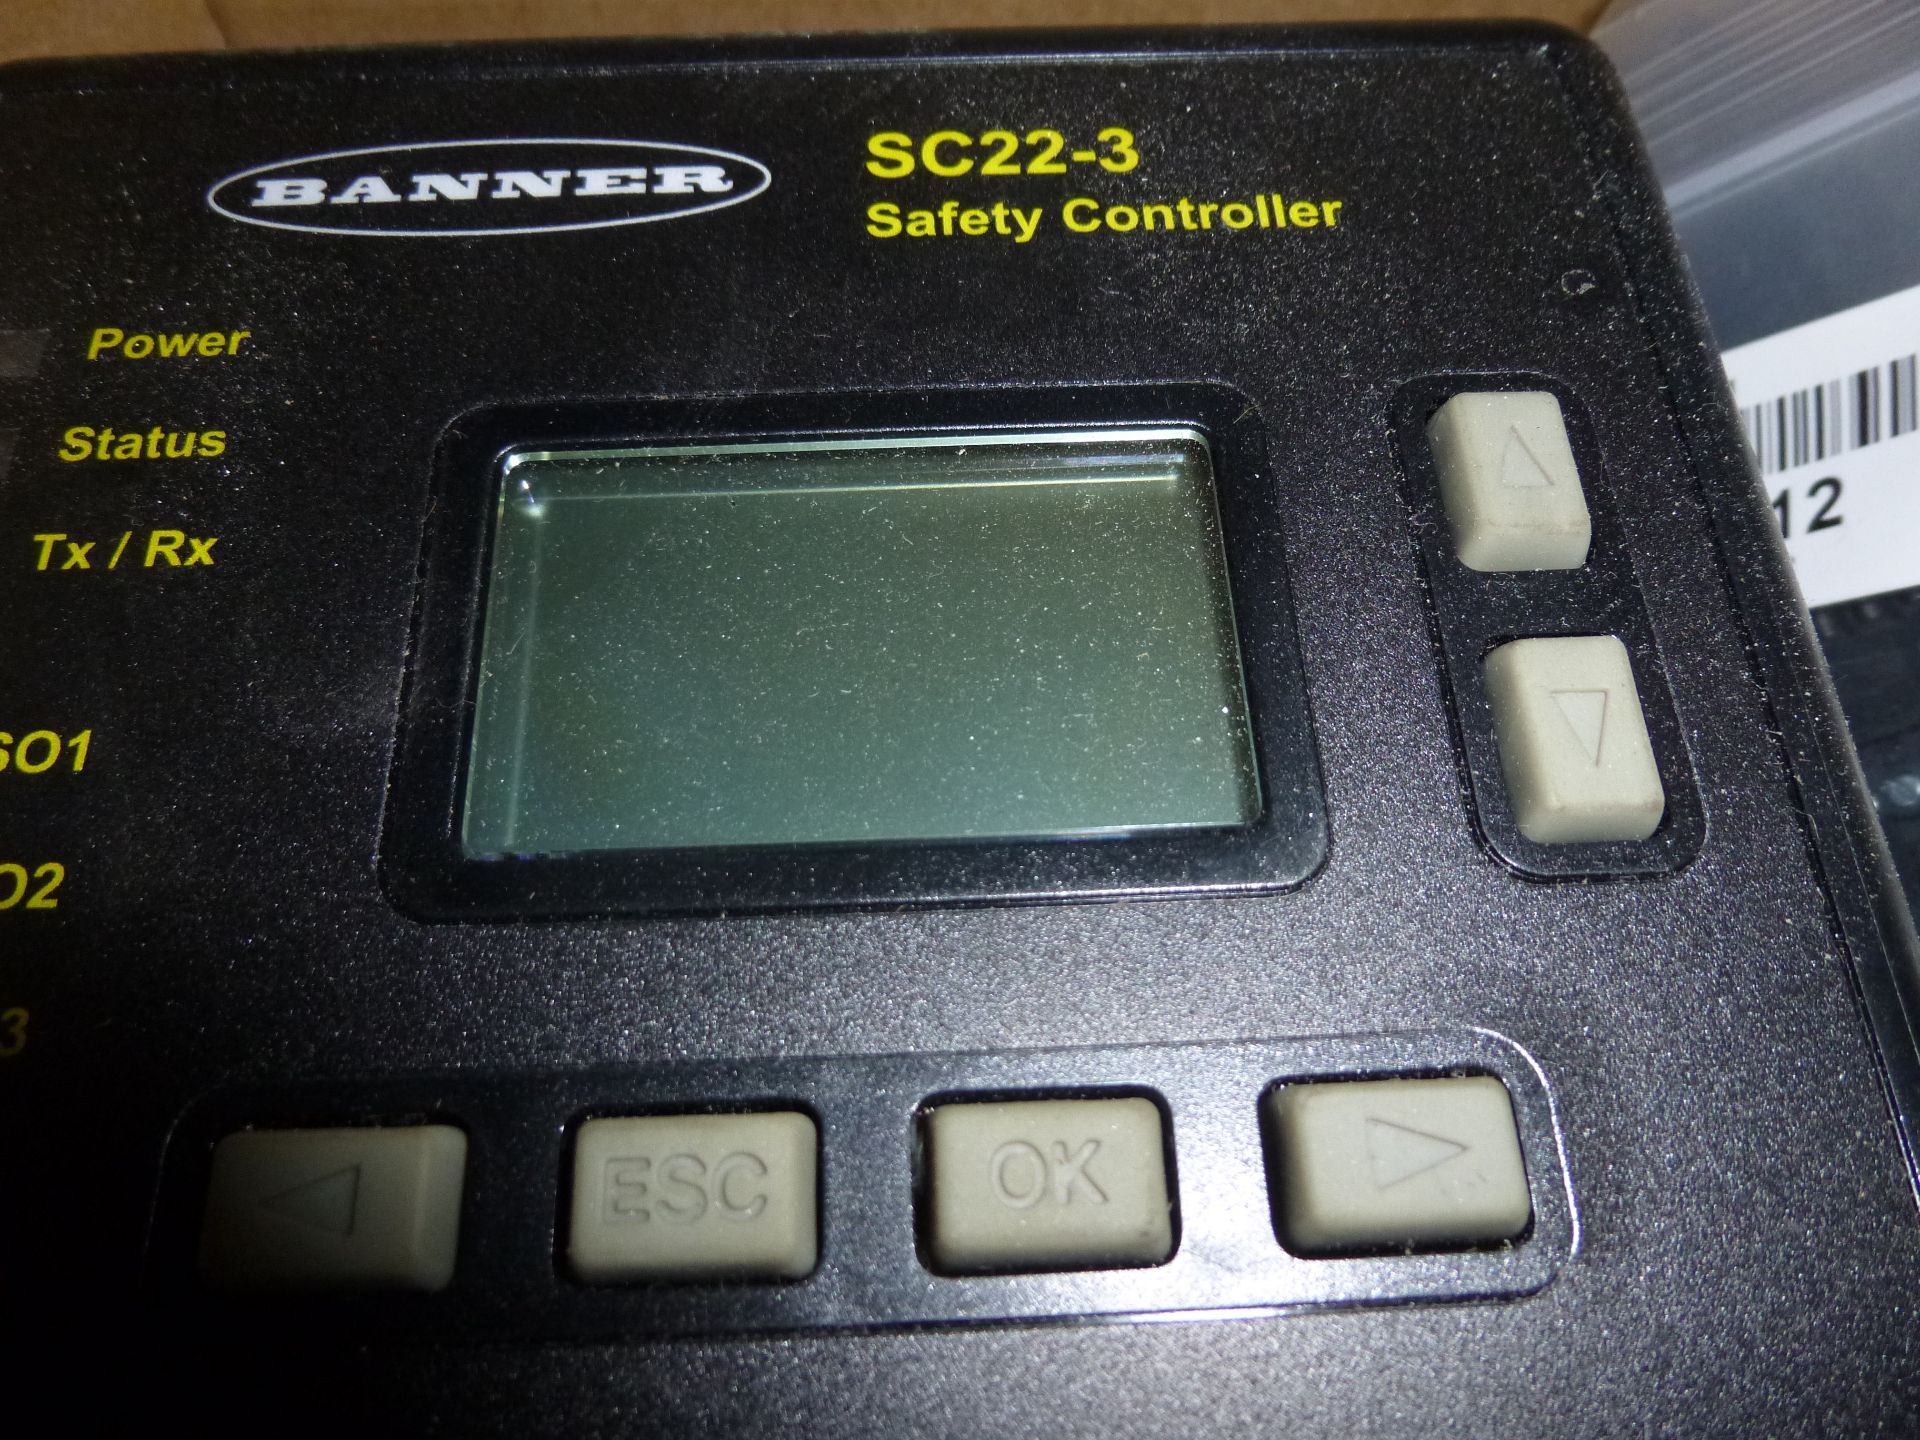 Banner SC22-3 Safety Controller, as always with Brolyn LLC auctions, all lots can be picked up - Image 2 of 2